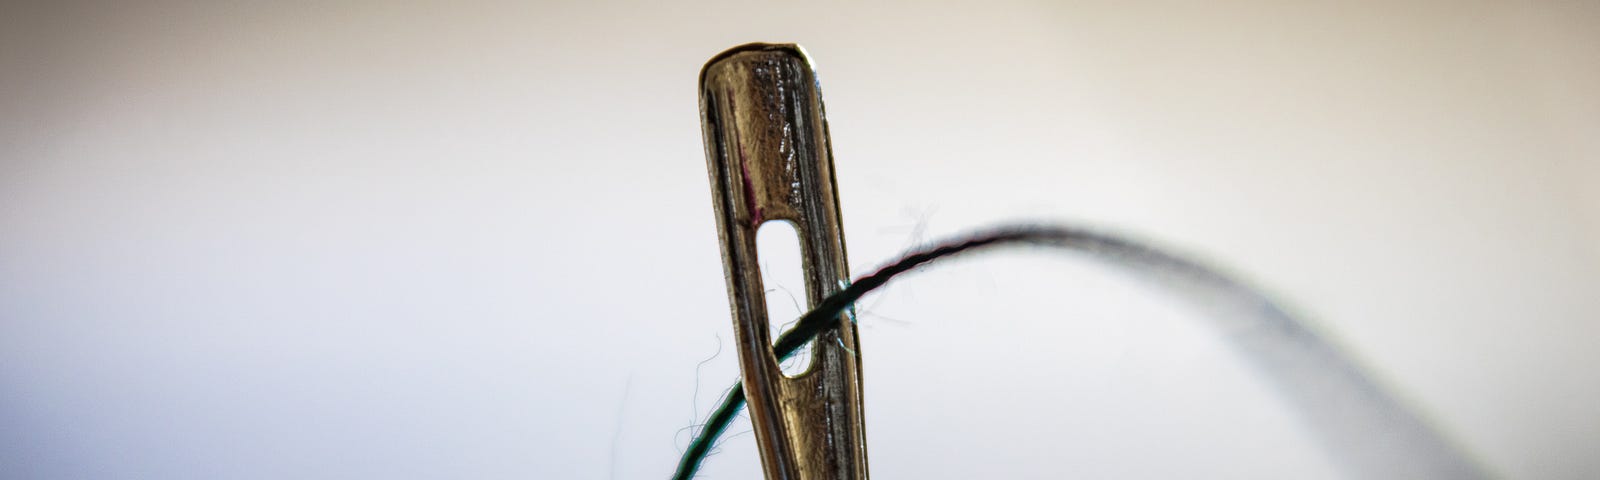 Close-up of thread in the eye of the needle